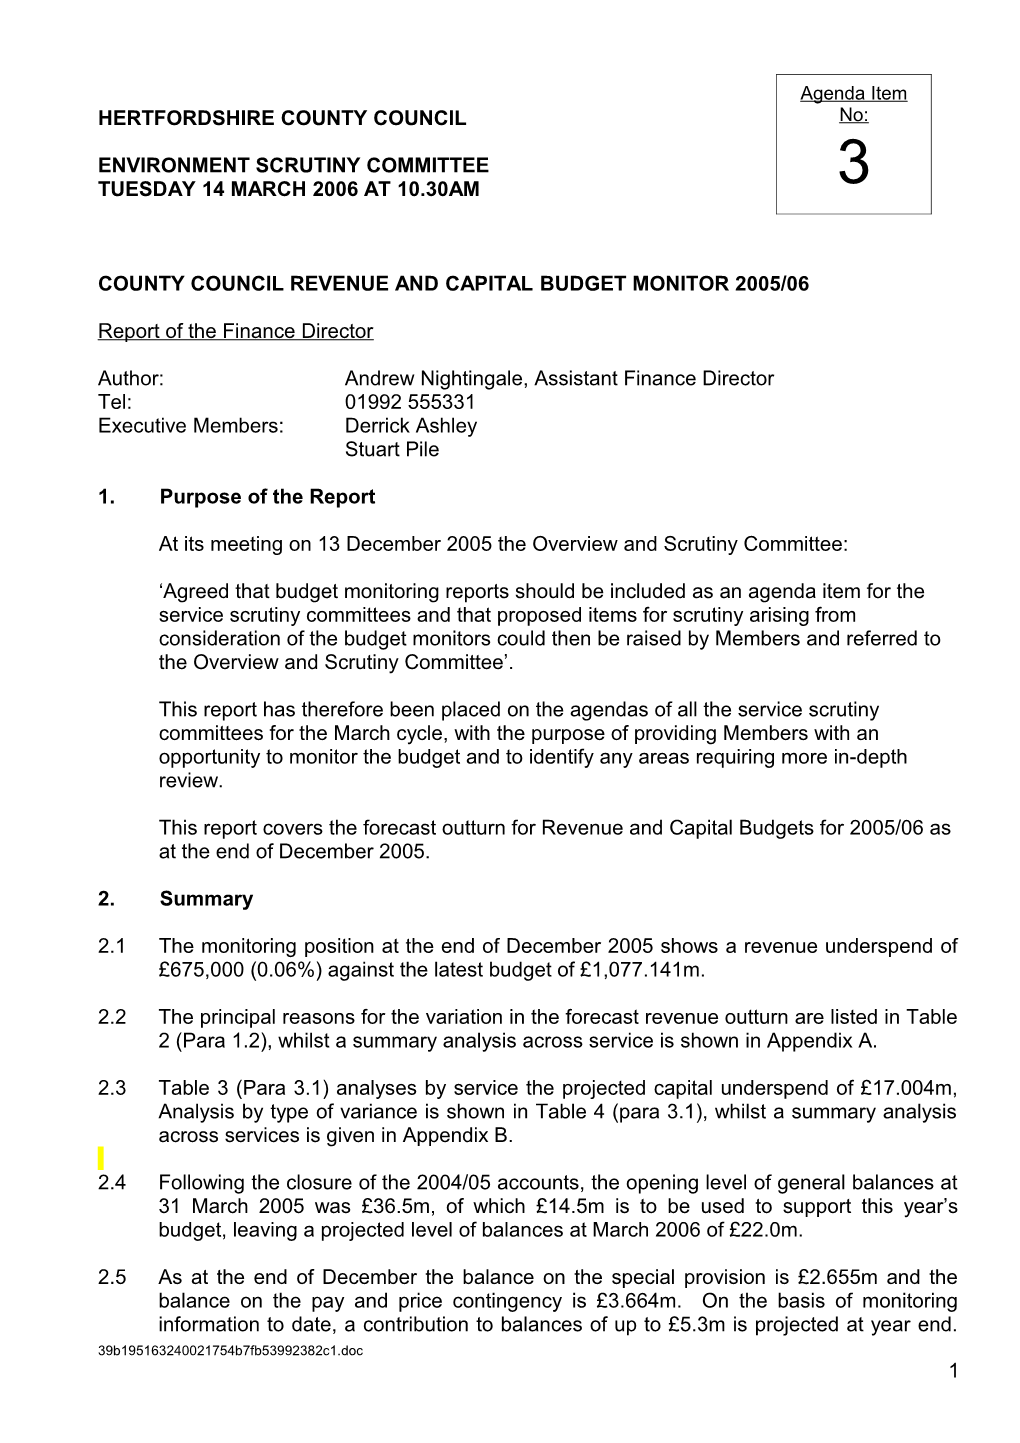 County Council Revenue and Capital Budget Monitor 2005/06